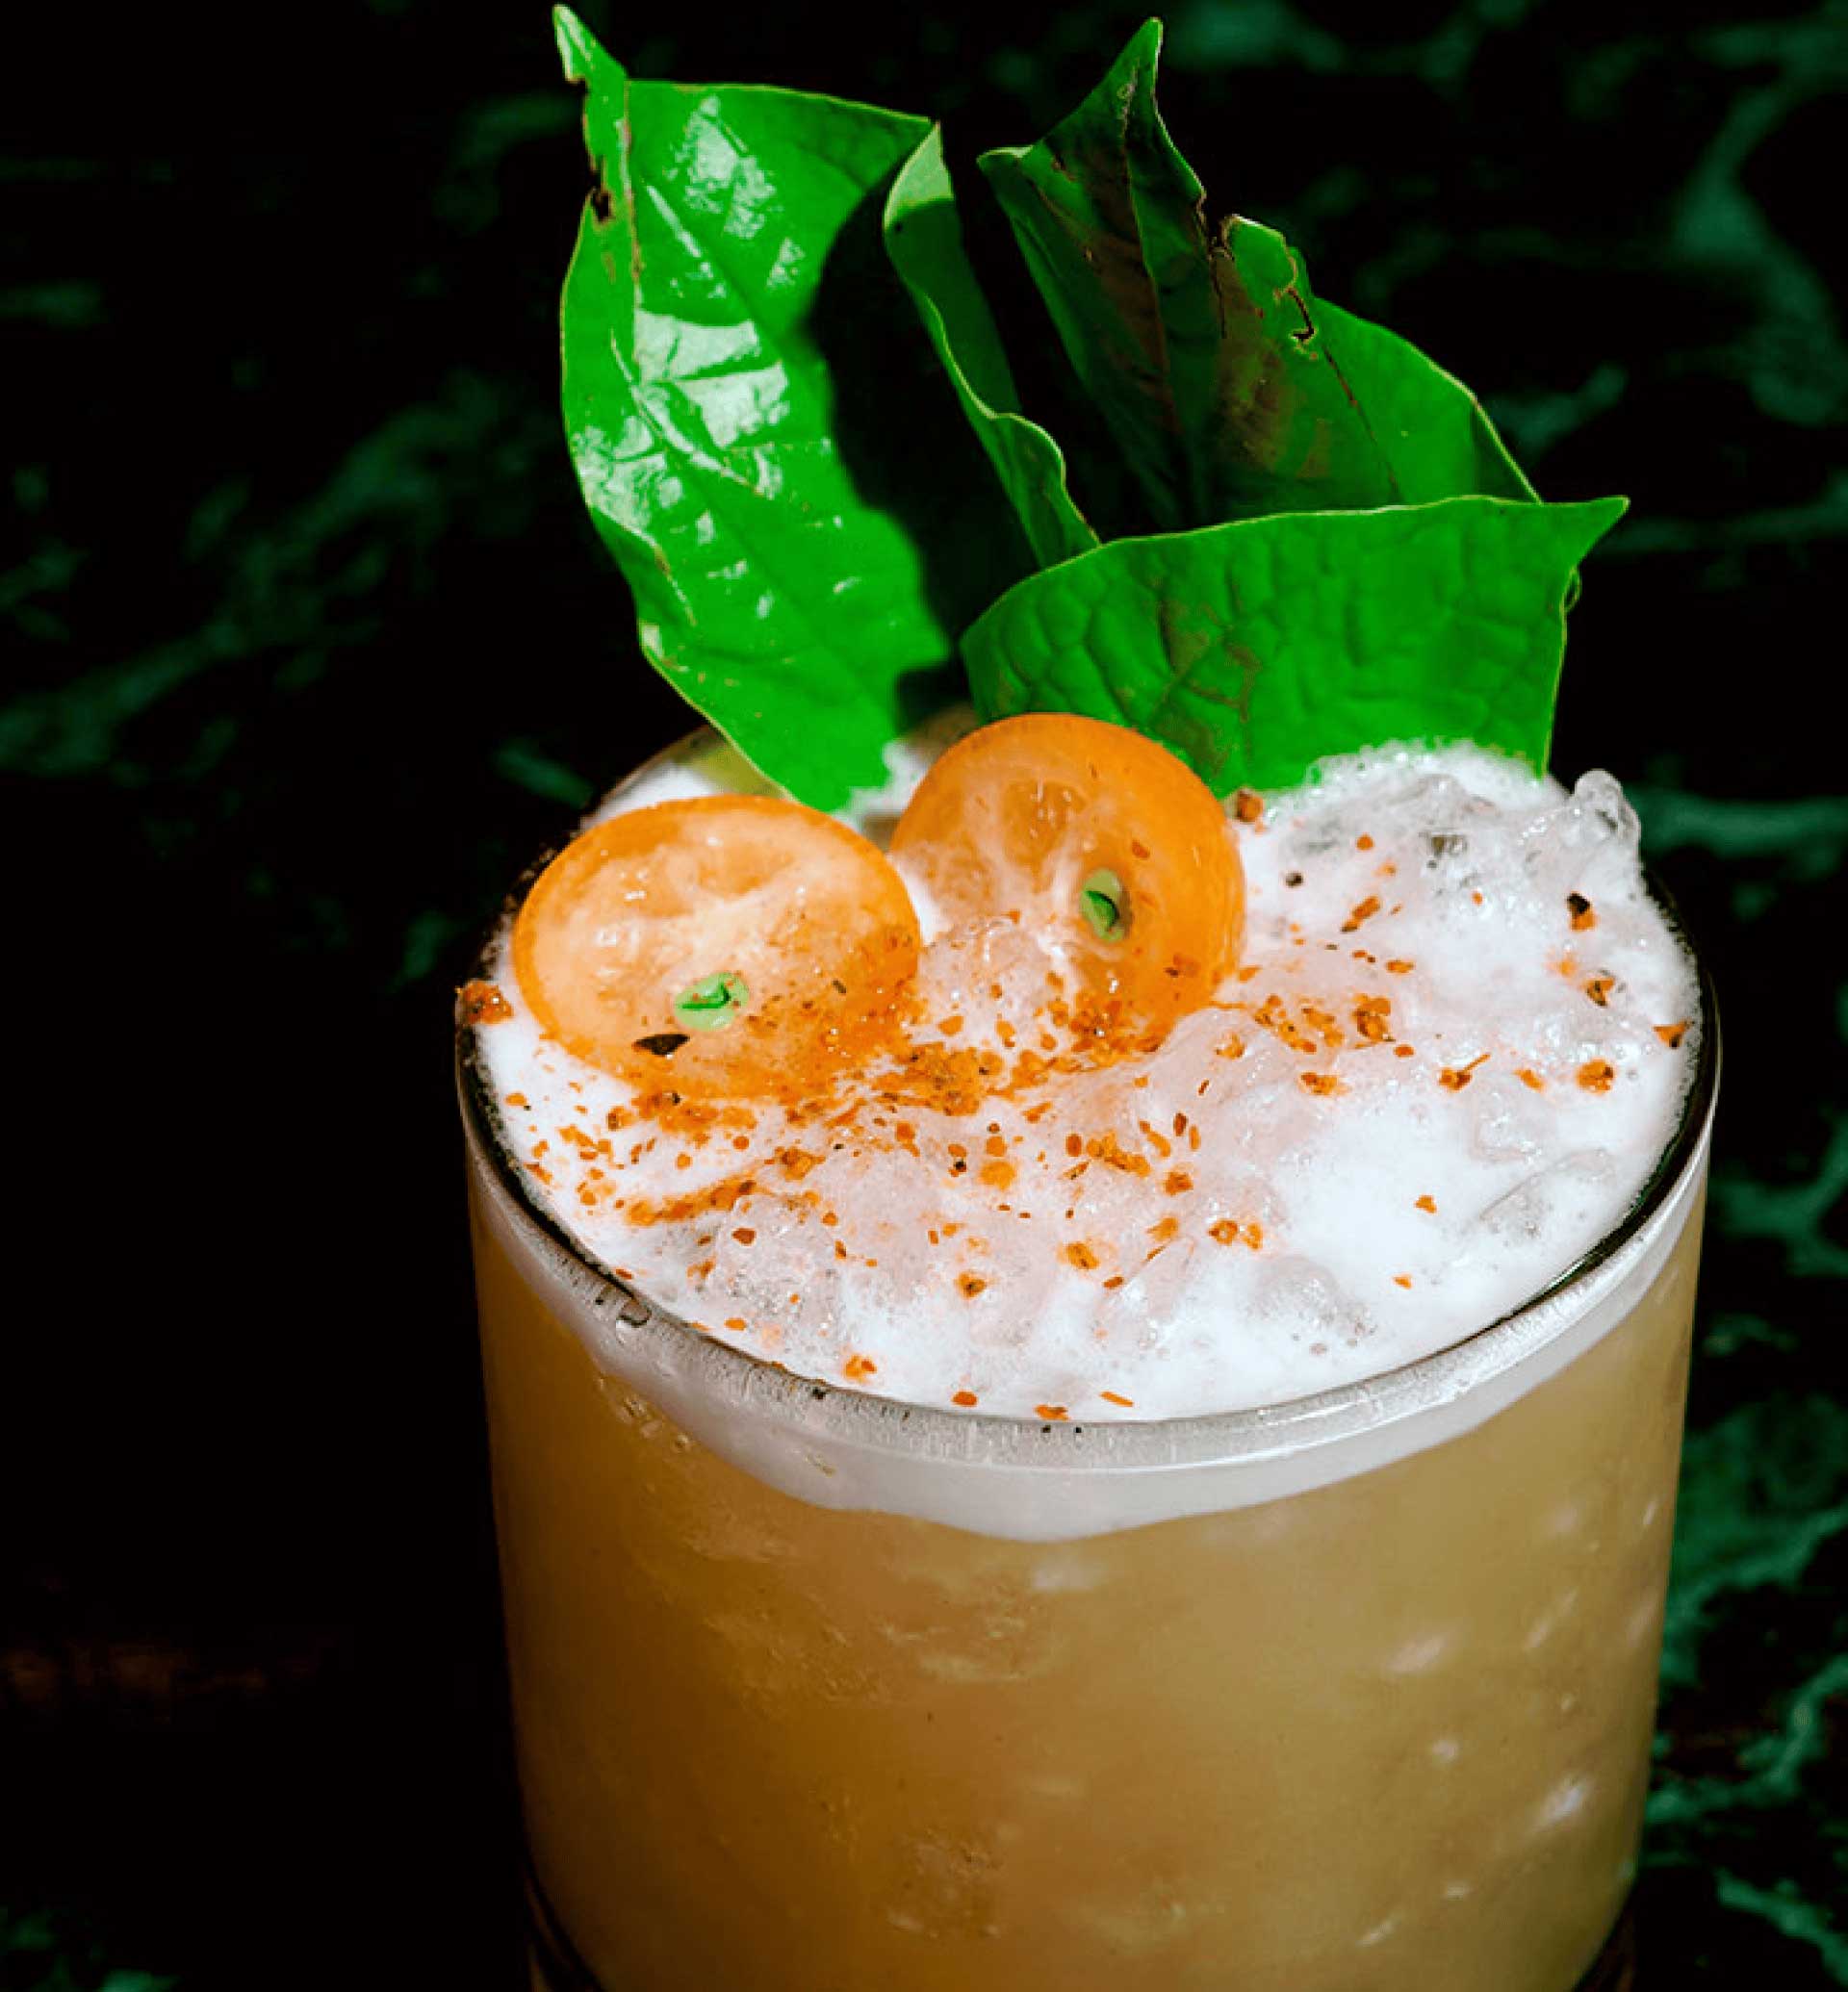 Orange cocktail with leaves